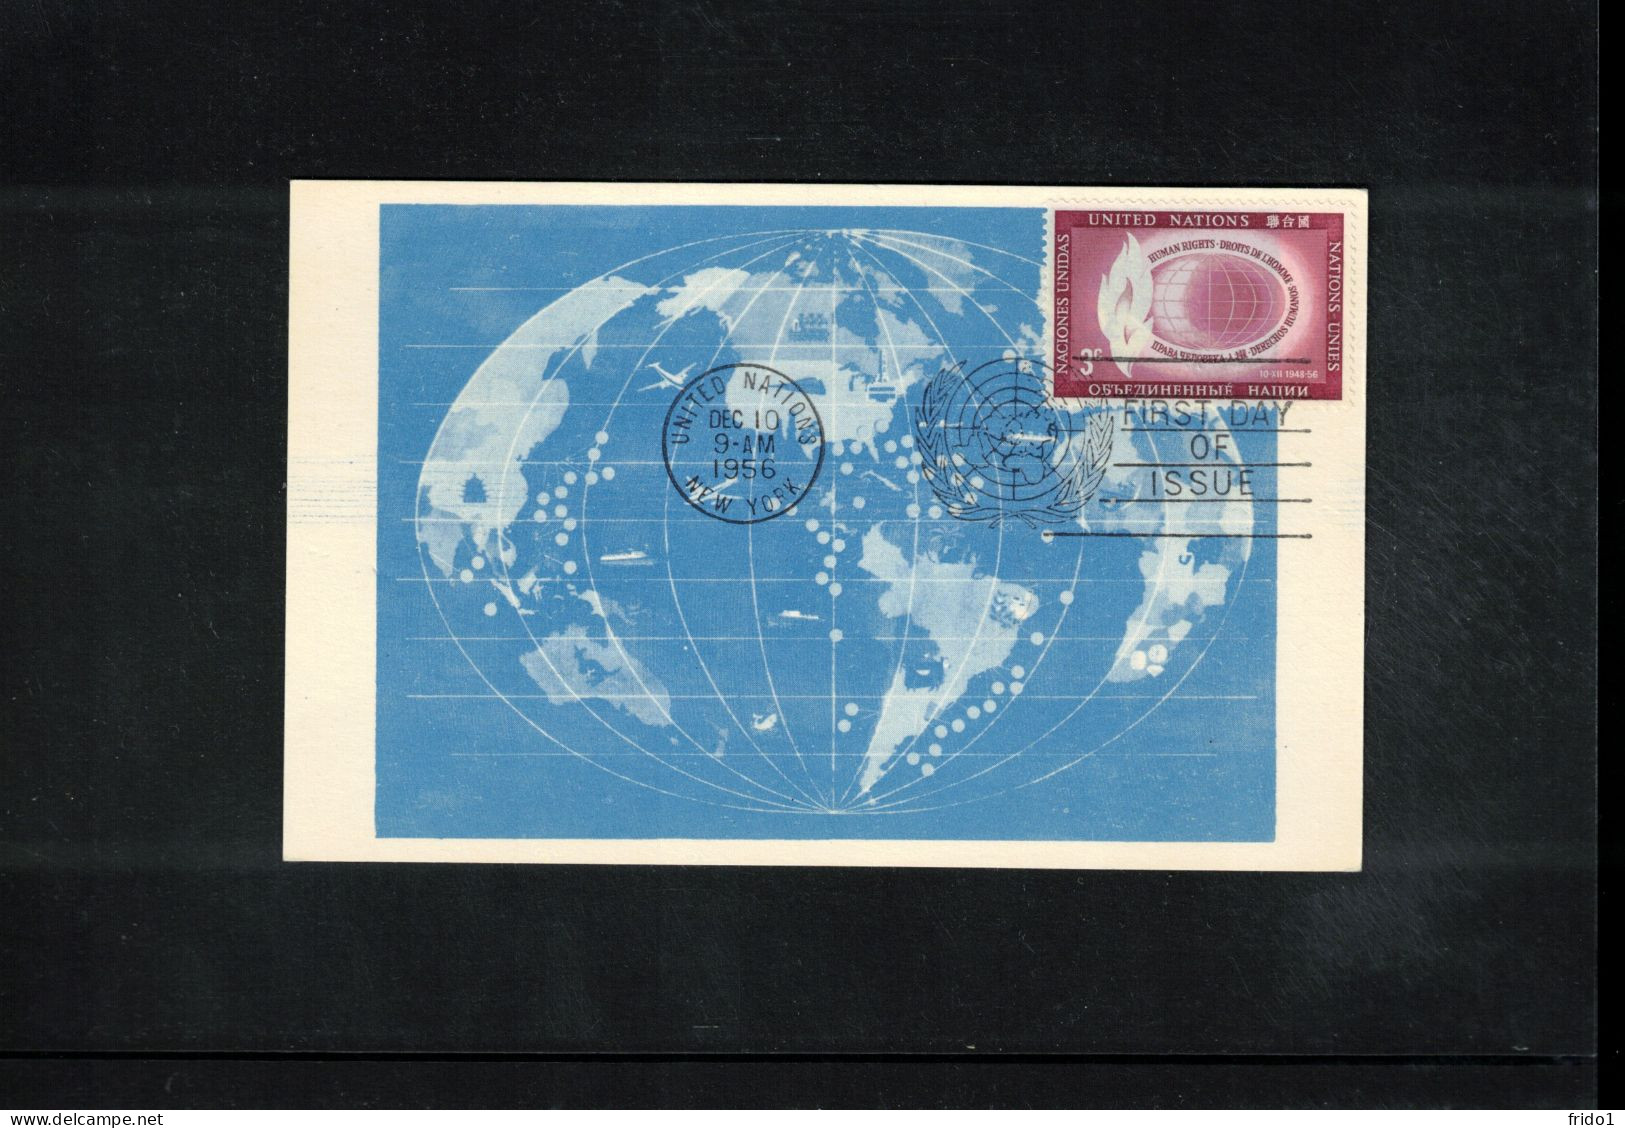 UN New York 1956 Human Rights Day Interesting Maximum Card With First Day Postmark - Cartes-maximum